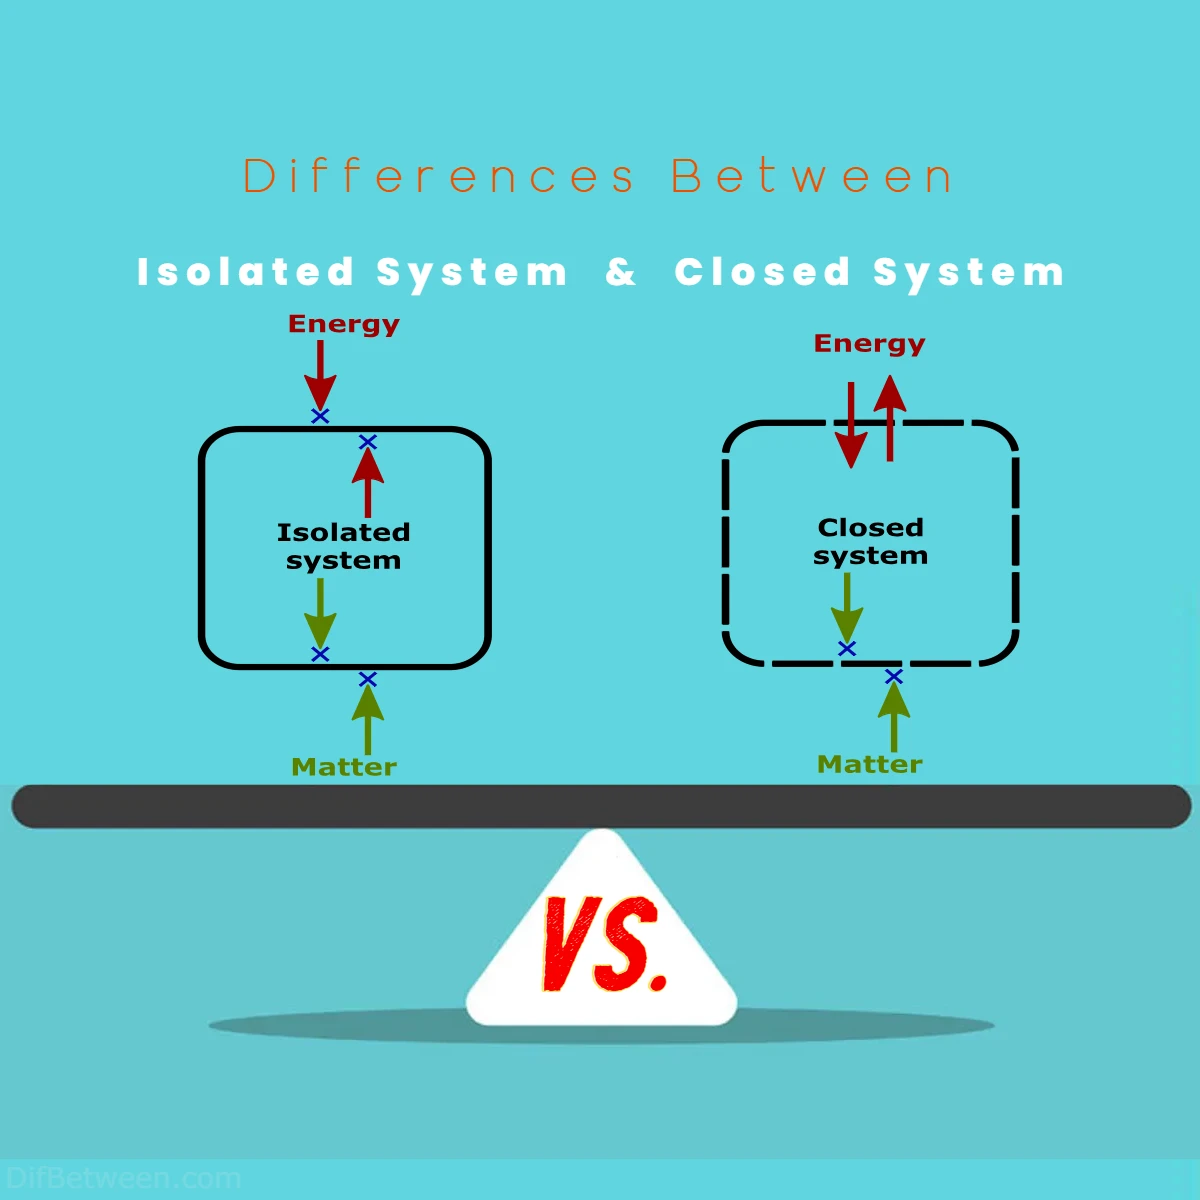 Differences Between Isolated System vs Closed System